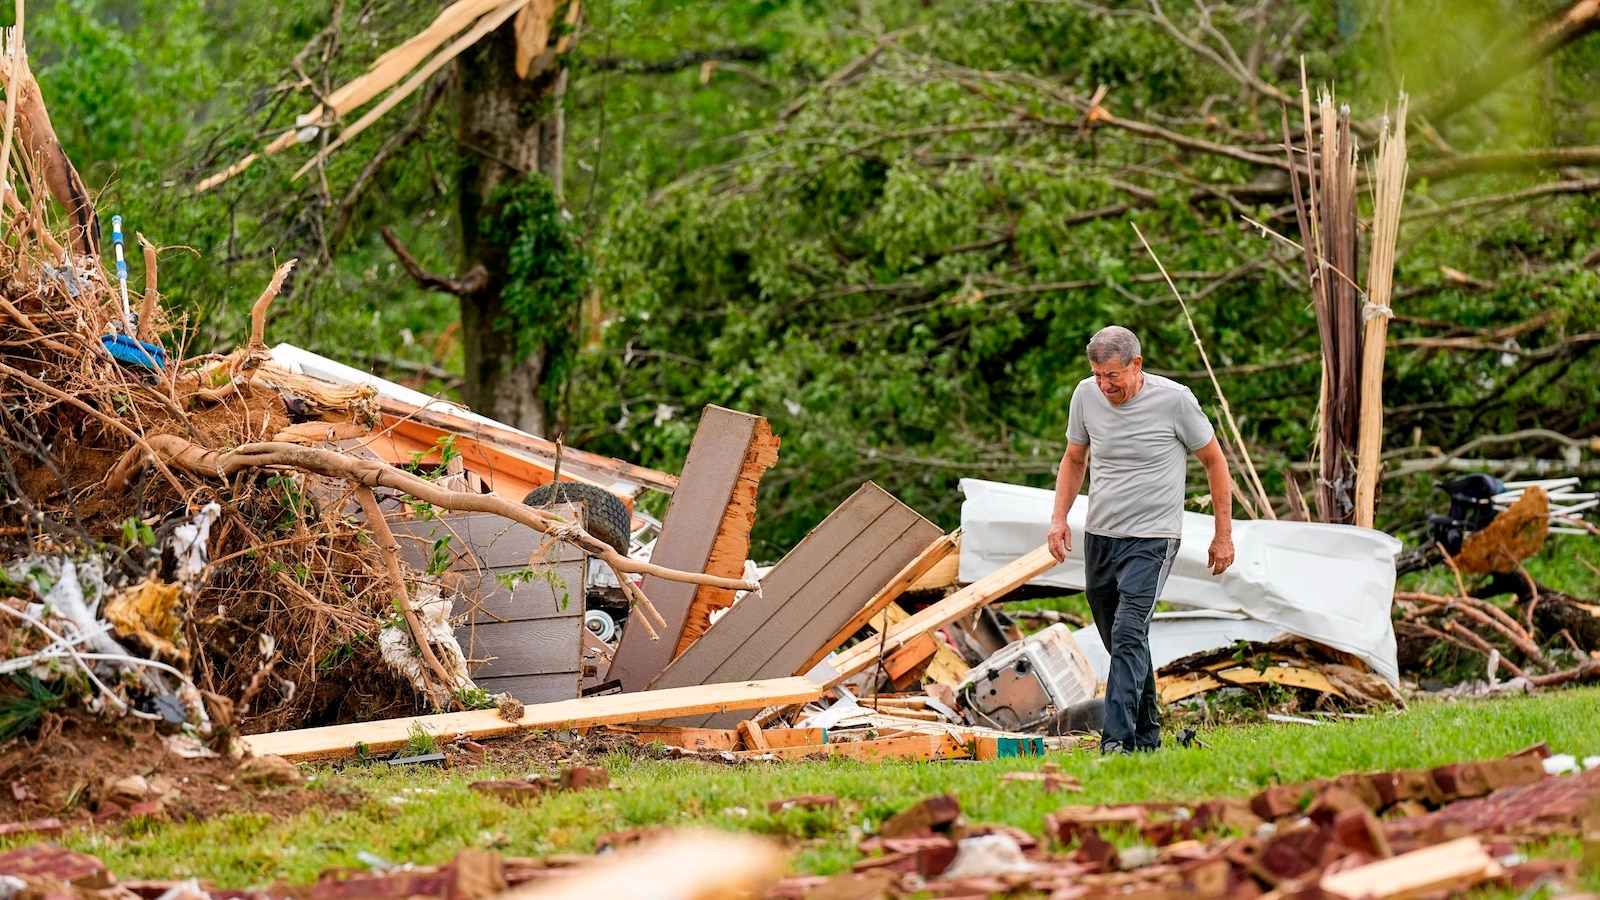 At least 105 tornadoes reported across the country since Monday